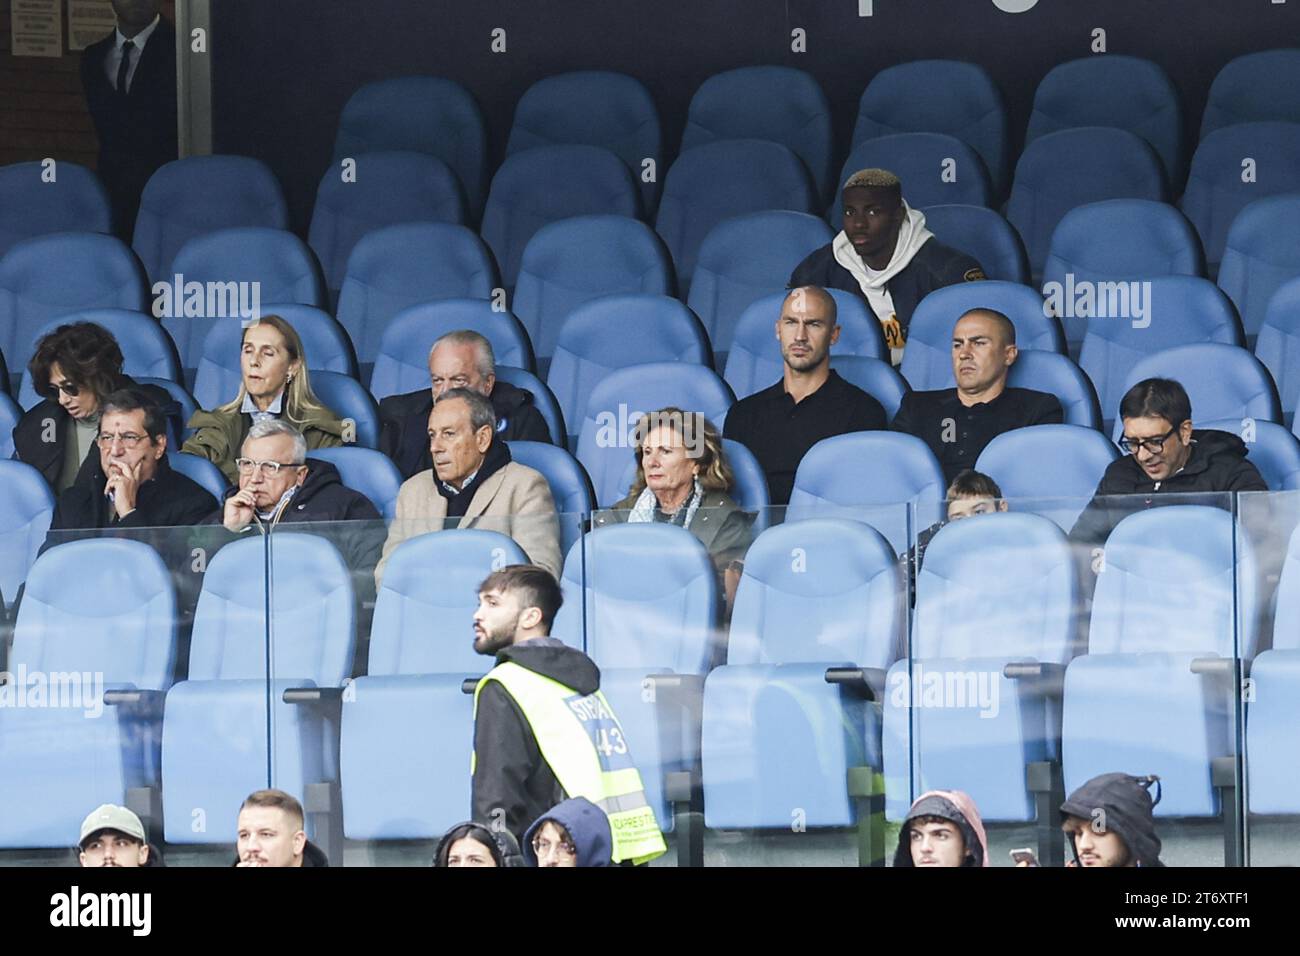 In the official stands, SSC Napoli's Nigerian forward Victor Osimhen and brothers Paolo and Fabio Cannavaro watch the match together with Napoli president Aurelio De laurentiis during the Serie A football match between SSC Napoli and Empoli at the Diego Armando Maradona Stadium in Naples, southern Italy, on November 12, 2023. Stock Photo